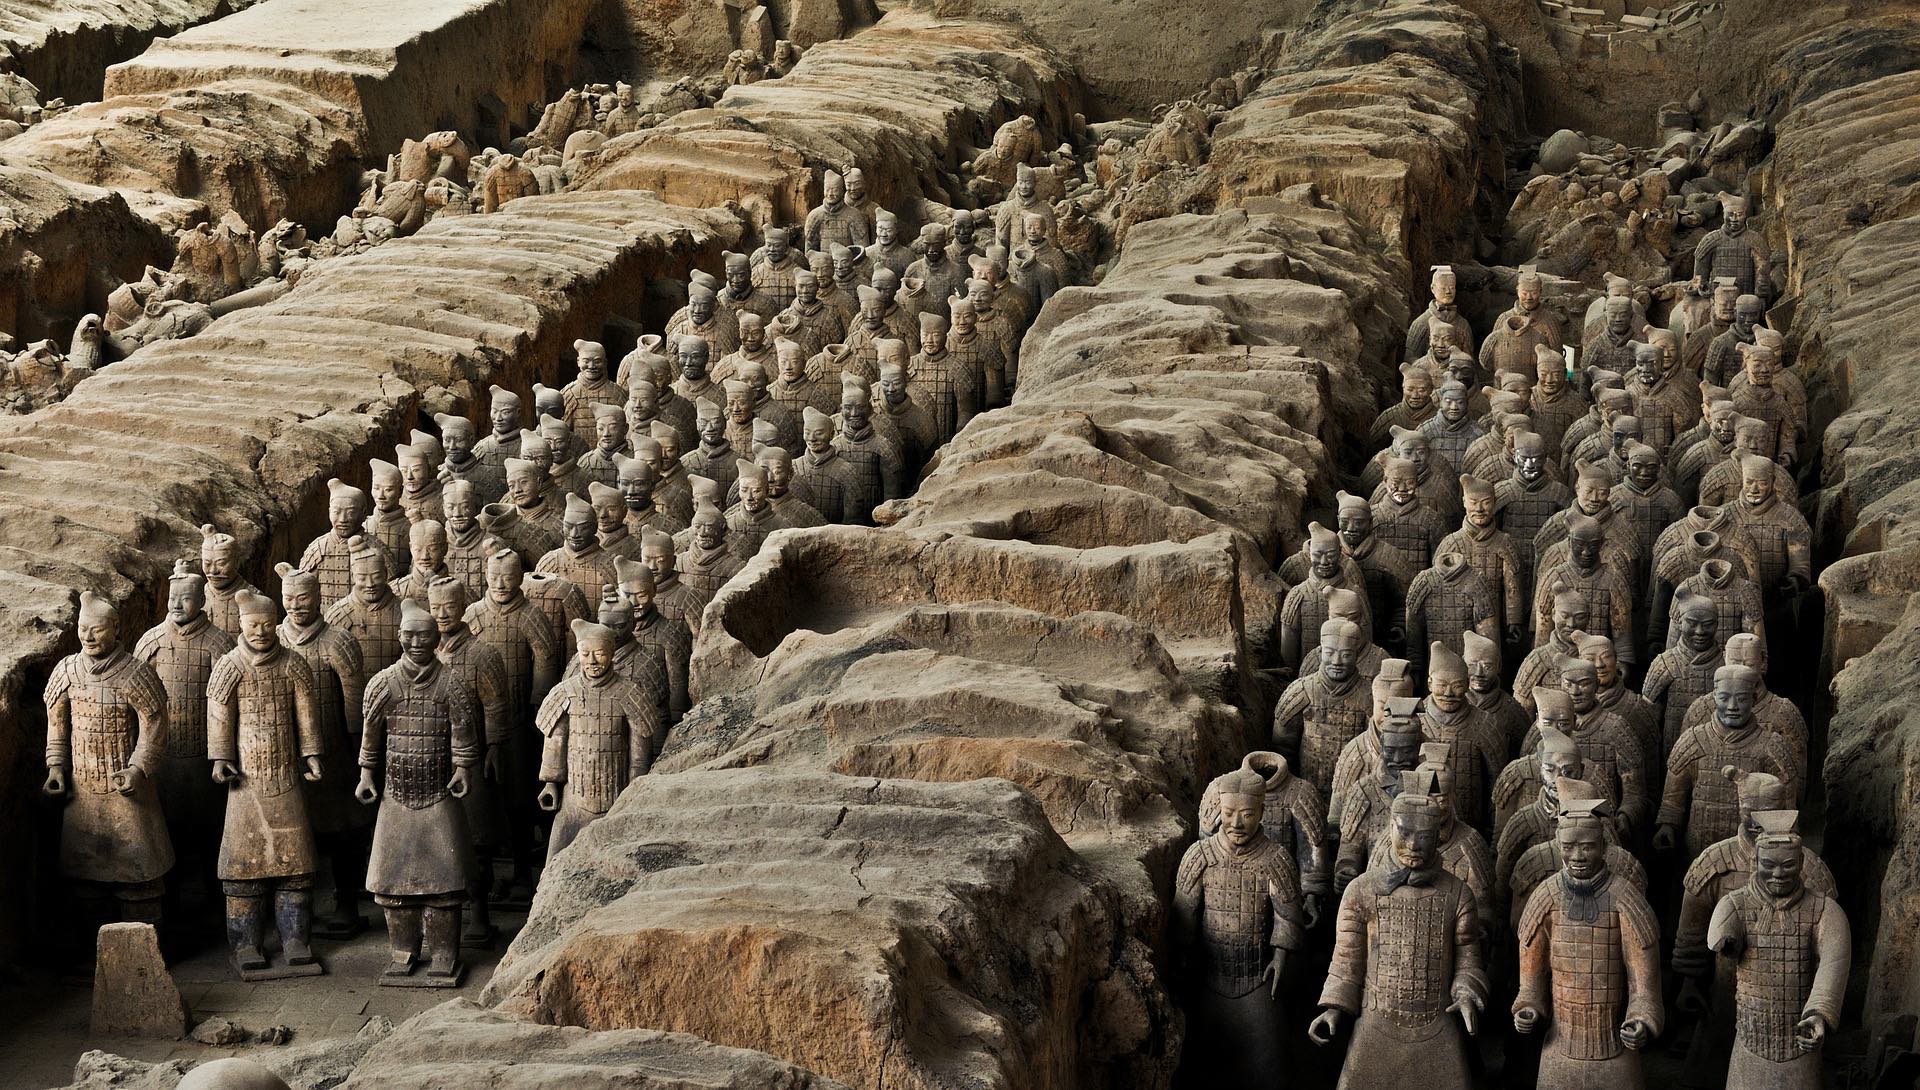 a group of terracotta army